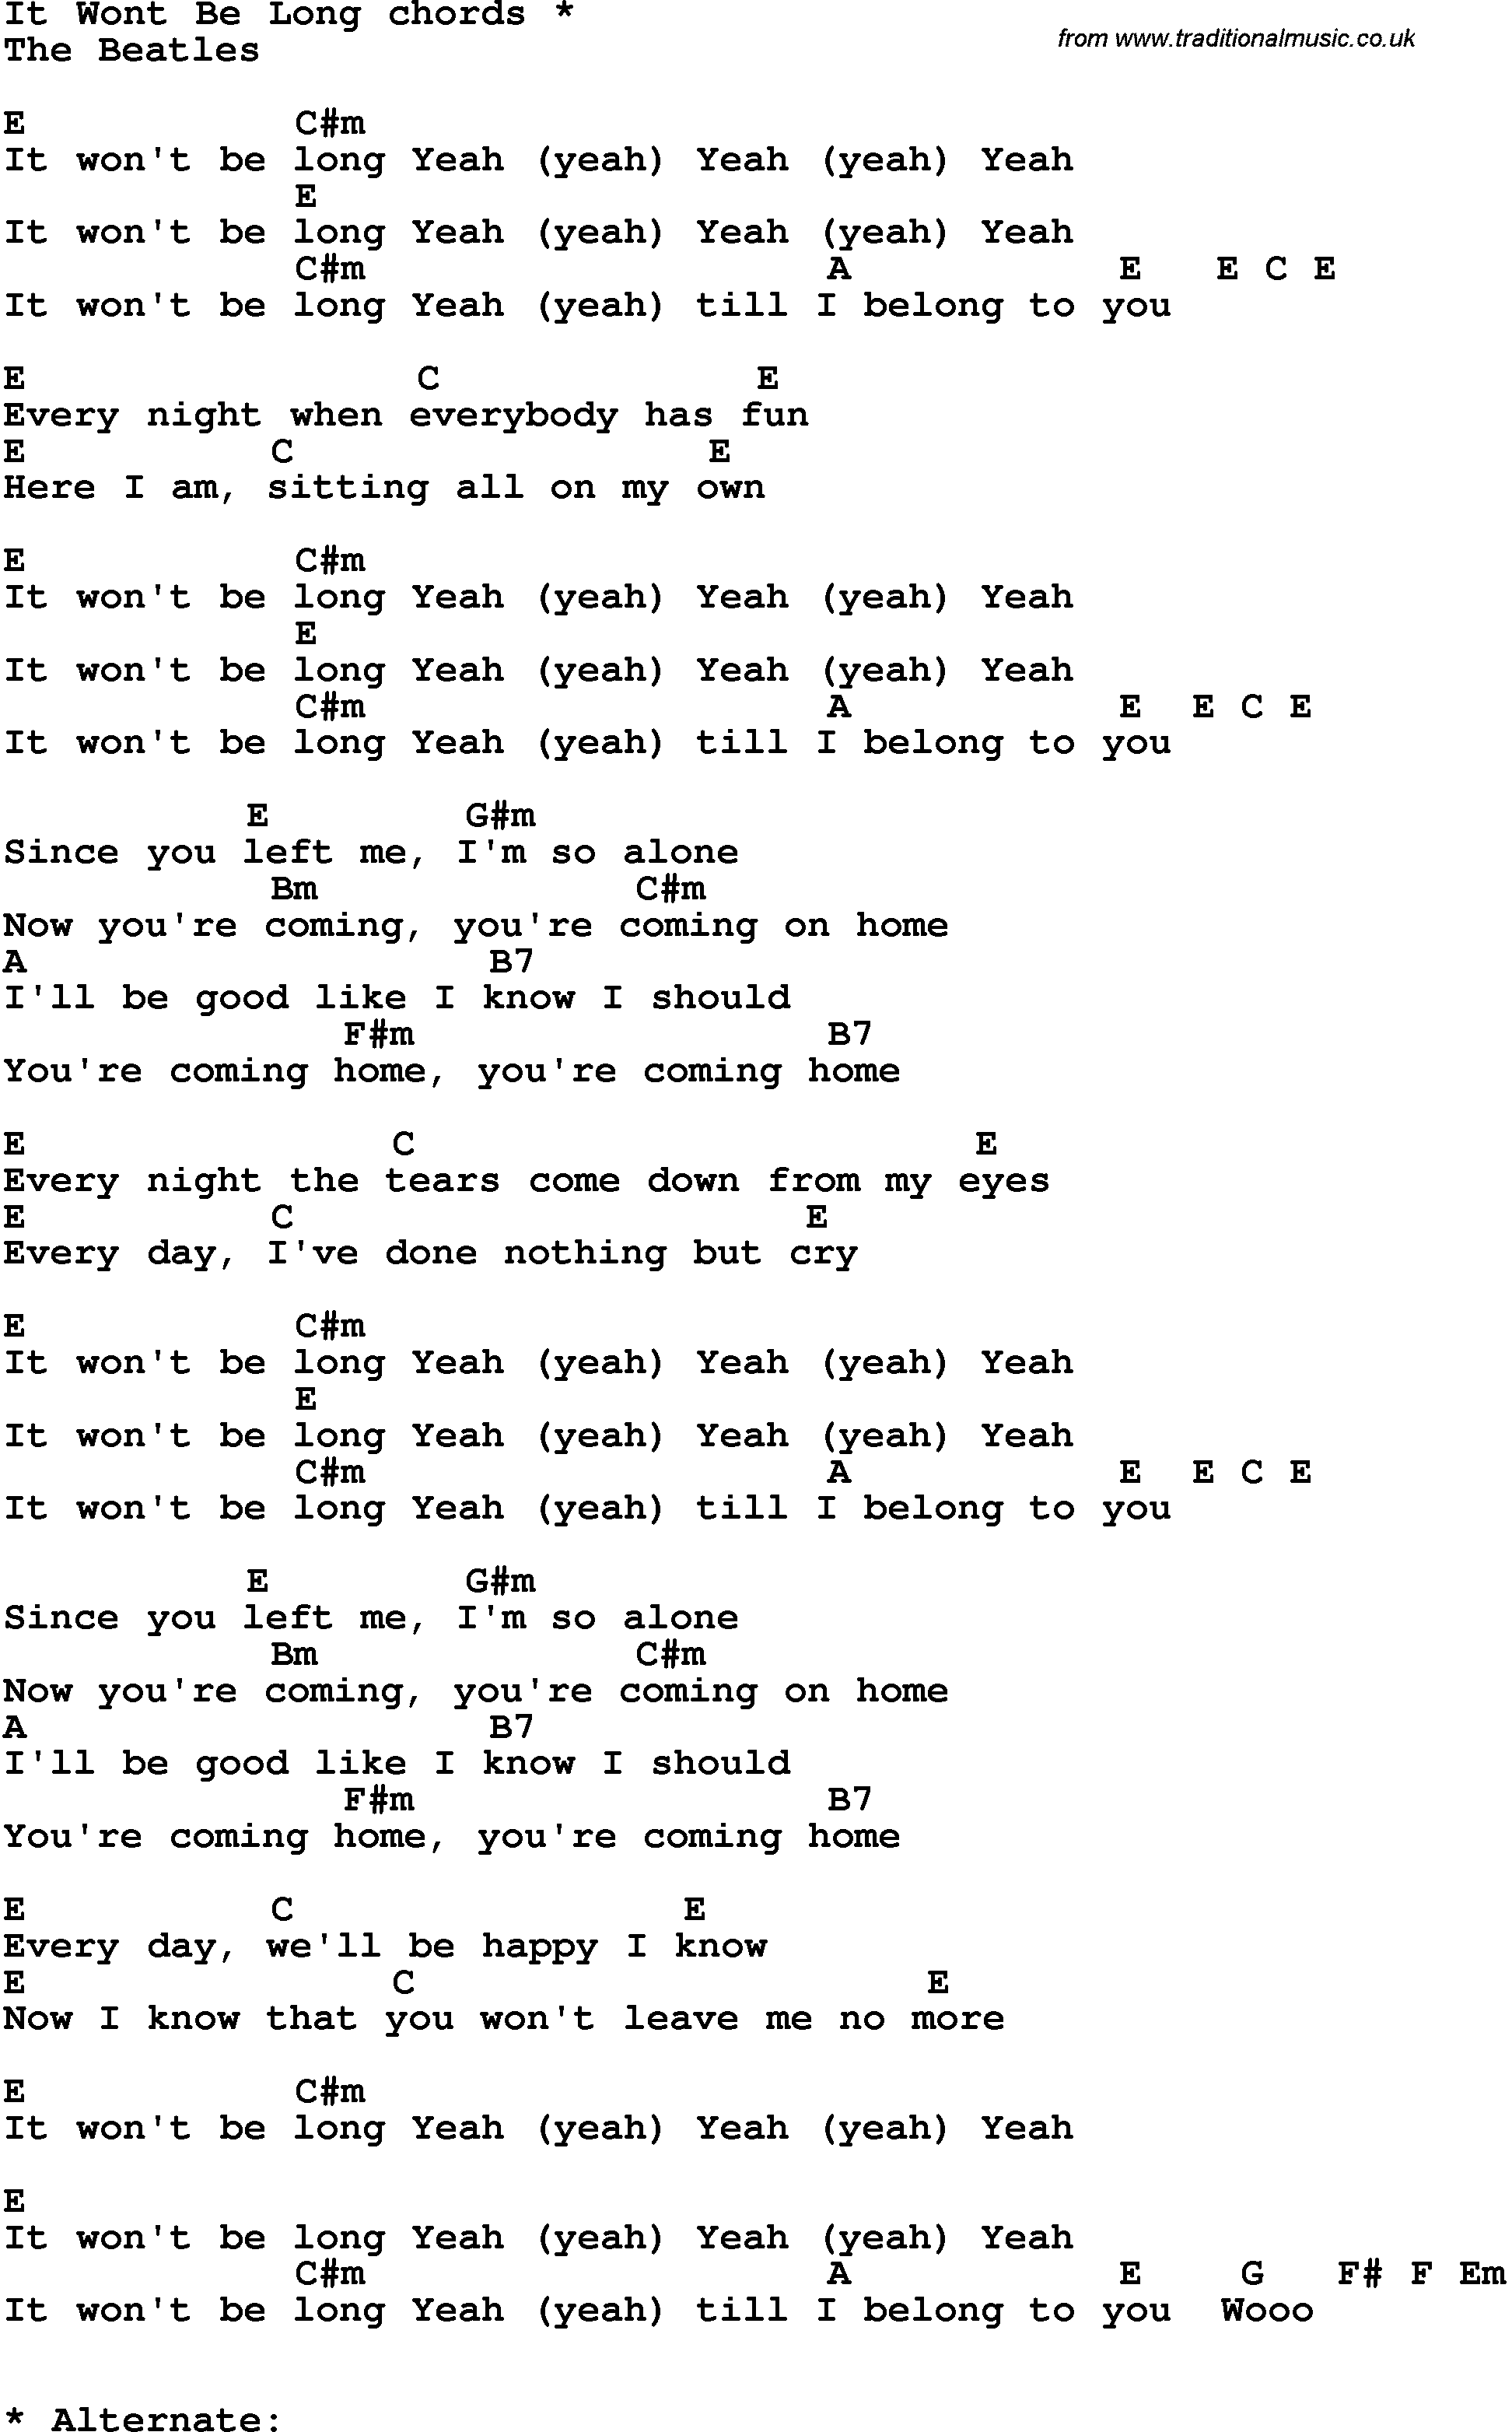 Song Lyrics with guitar chords for It Won't Be Long - The Beatles